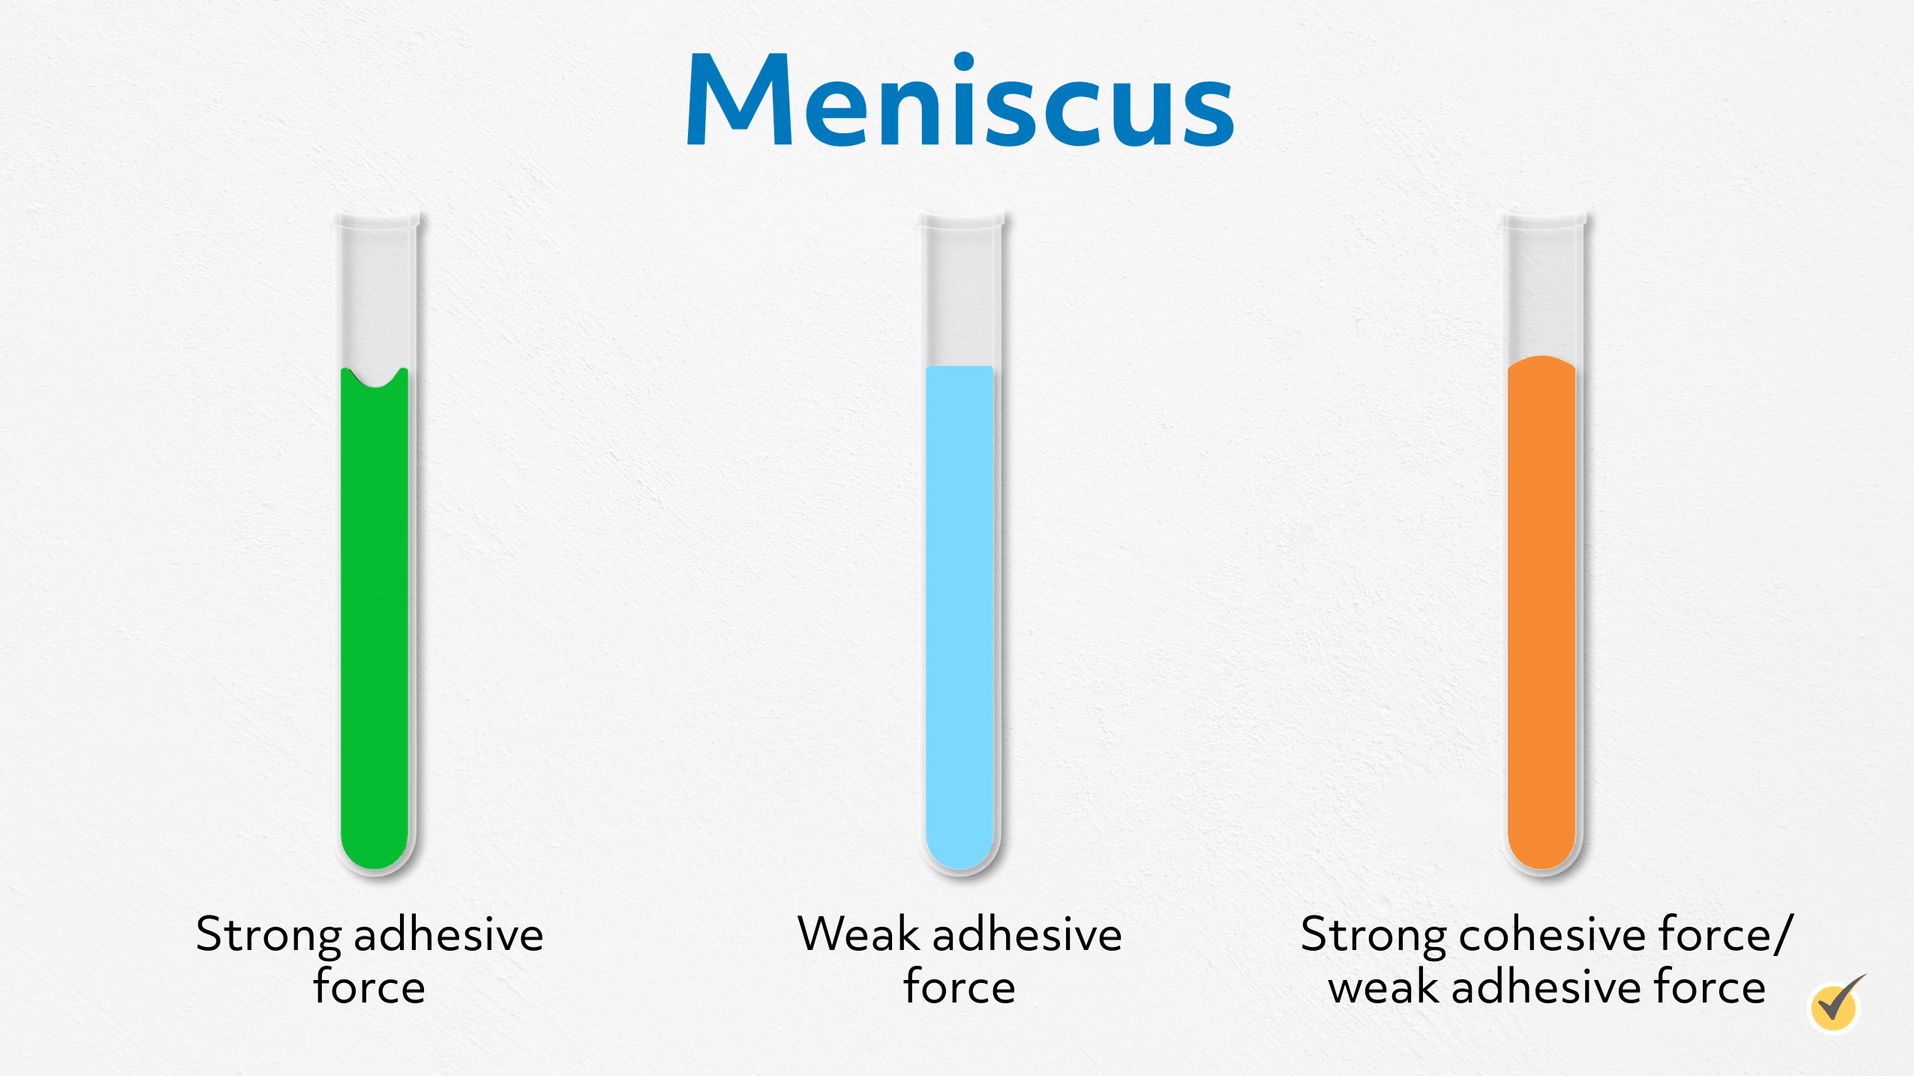 effect of adhesive force on meniscus